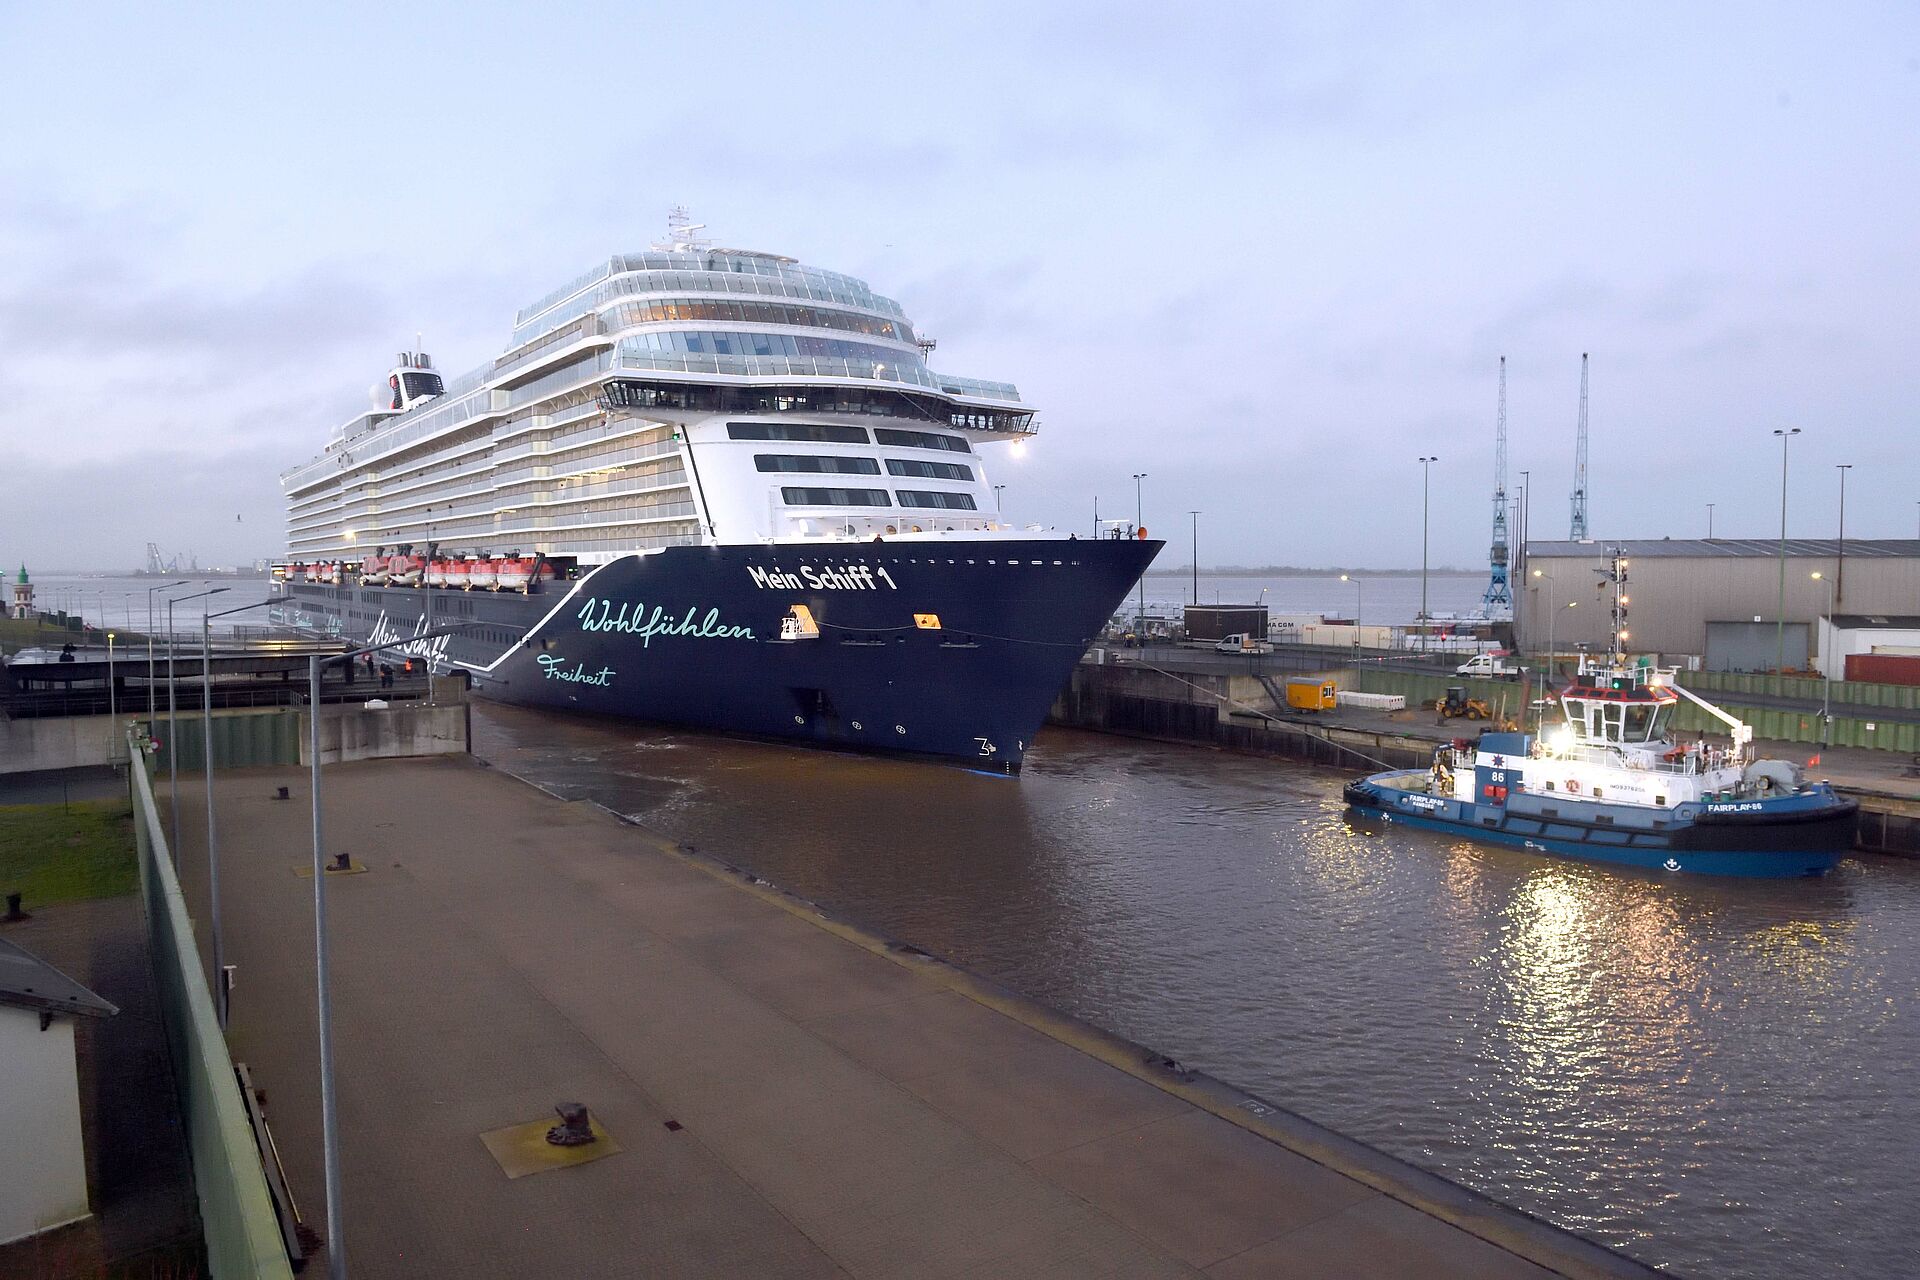 TUI'S largest ship departs with a tidal lock manoeuvre